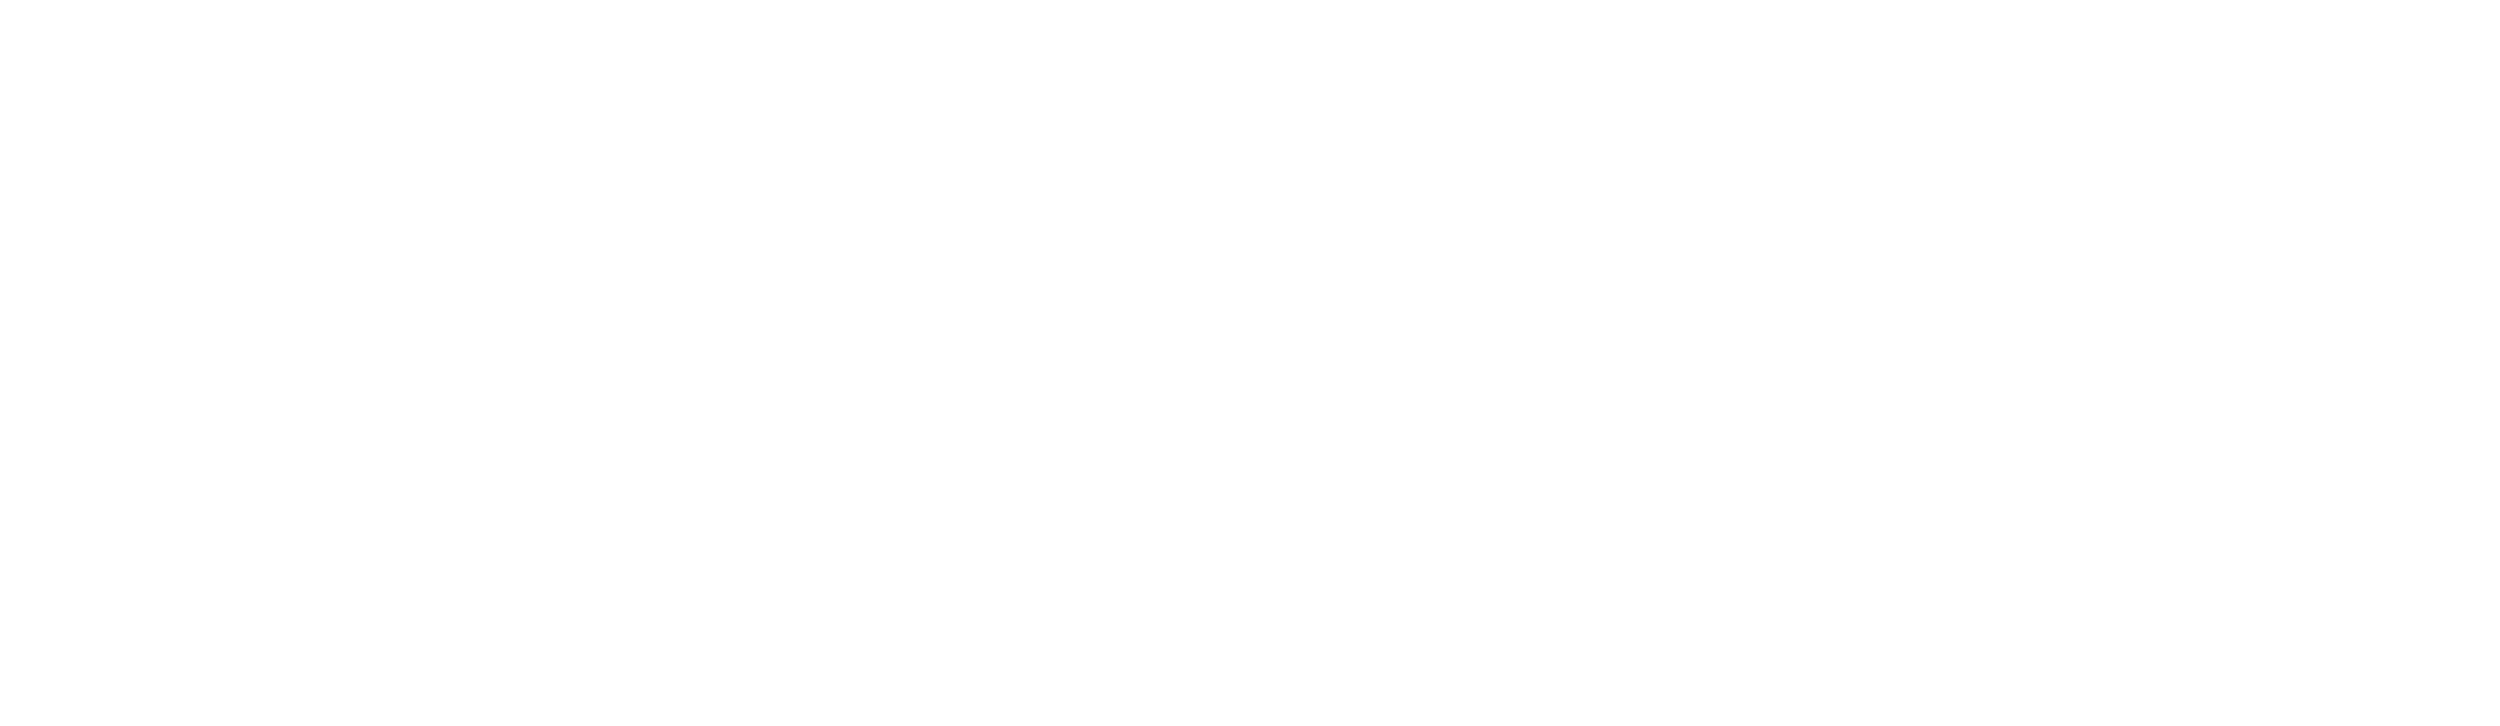 OFFICIALSELECTION-DIFF.png